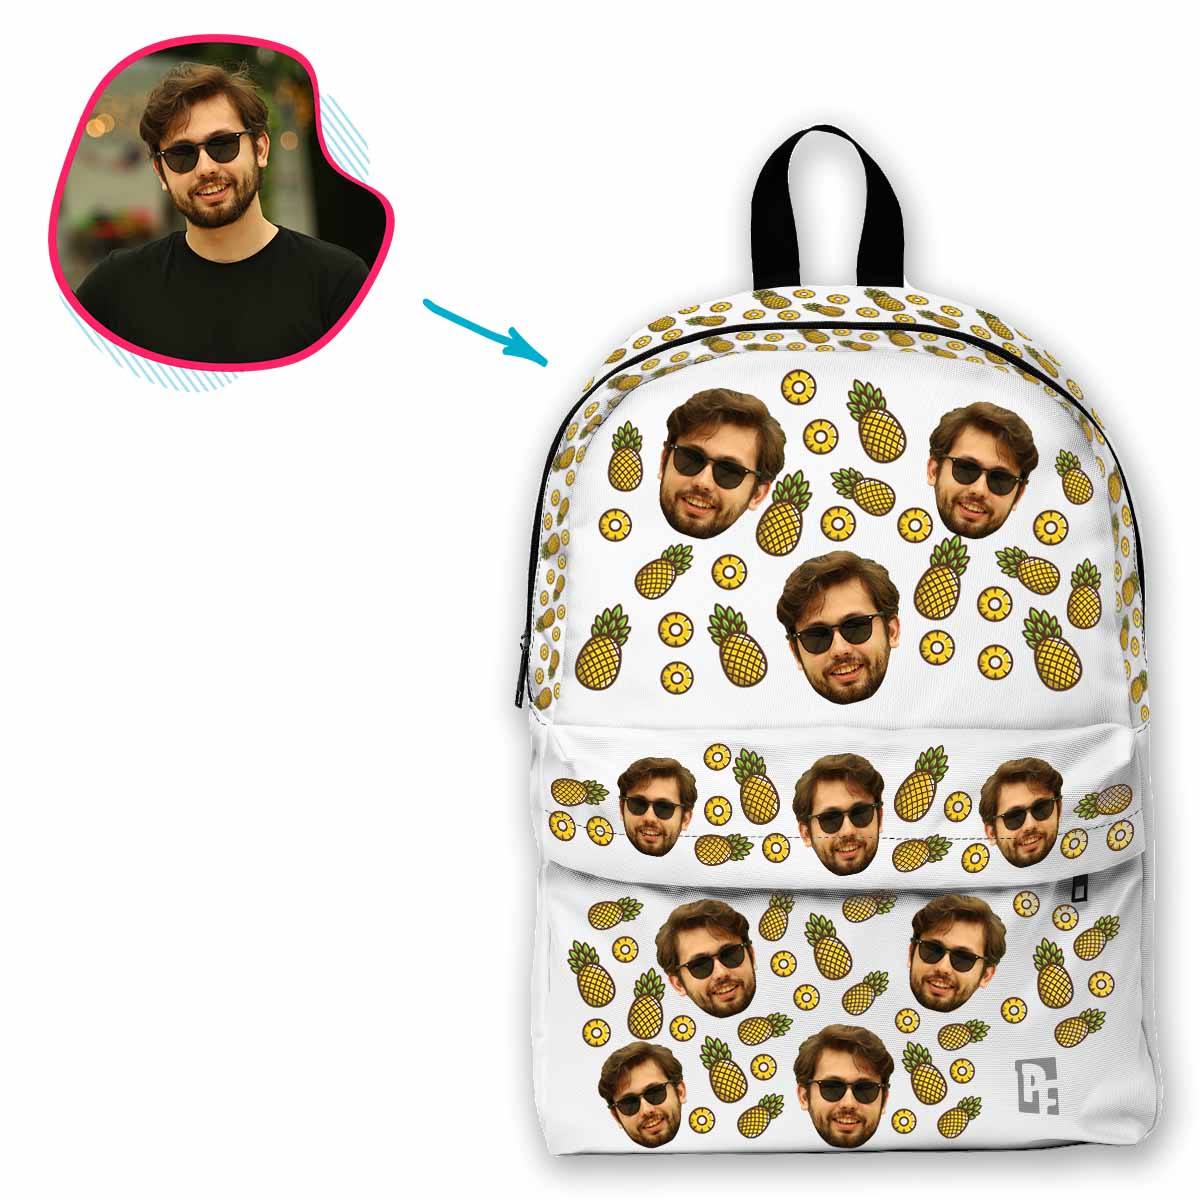 blue Fruits classic backpack personalized with photo of face printed on it